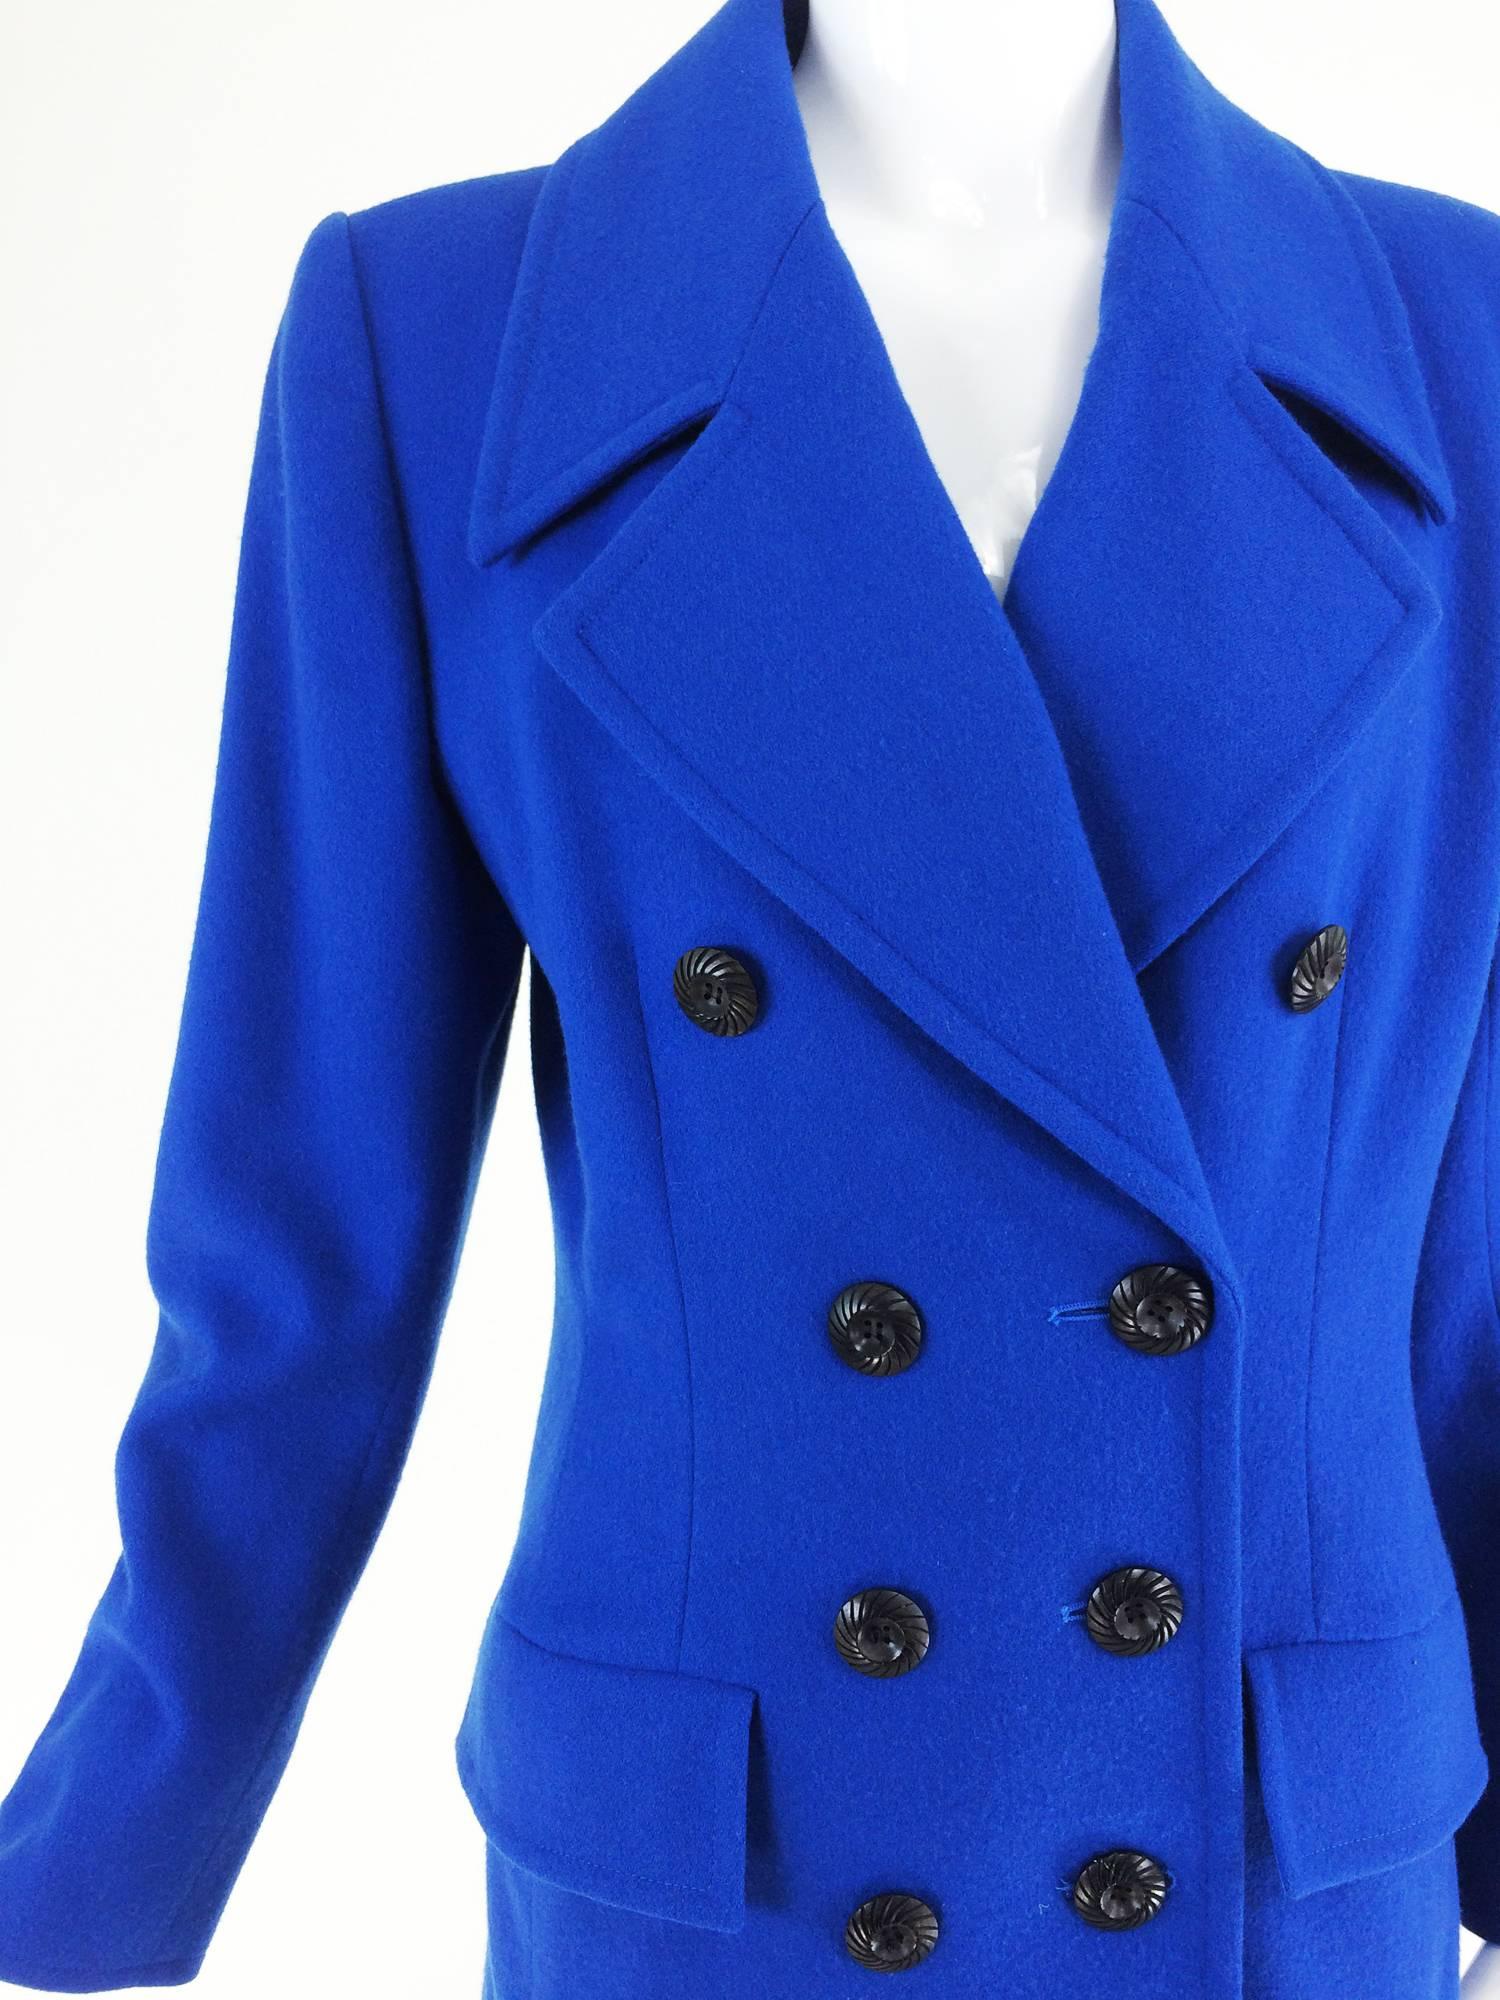 Yves St Laurent Rive Gauche bright blue wool pea coat 1990s...Bright blue 100% wool double breasted pea coat with wide notched lapels, hip flap pockets and darted waist...The long sleeves have 3 buttons at each cuff...Fits like a S-M...

In